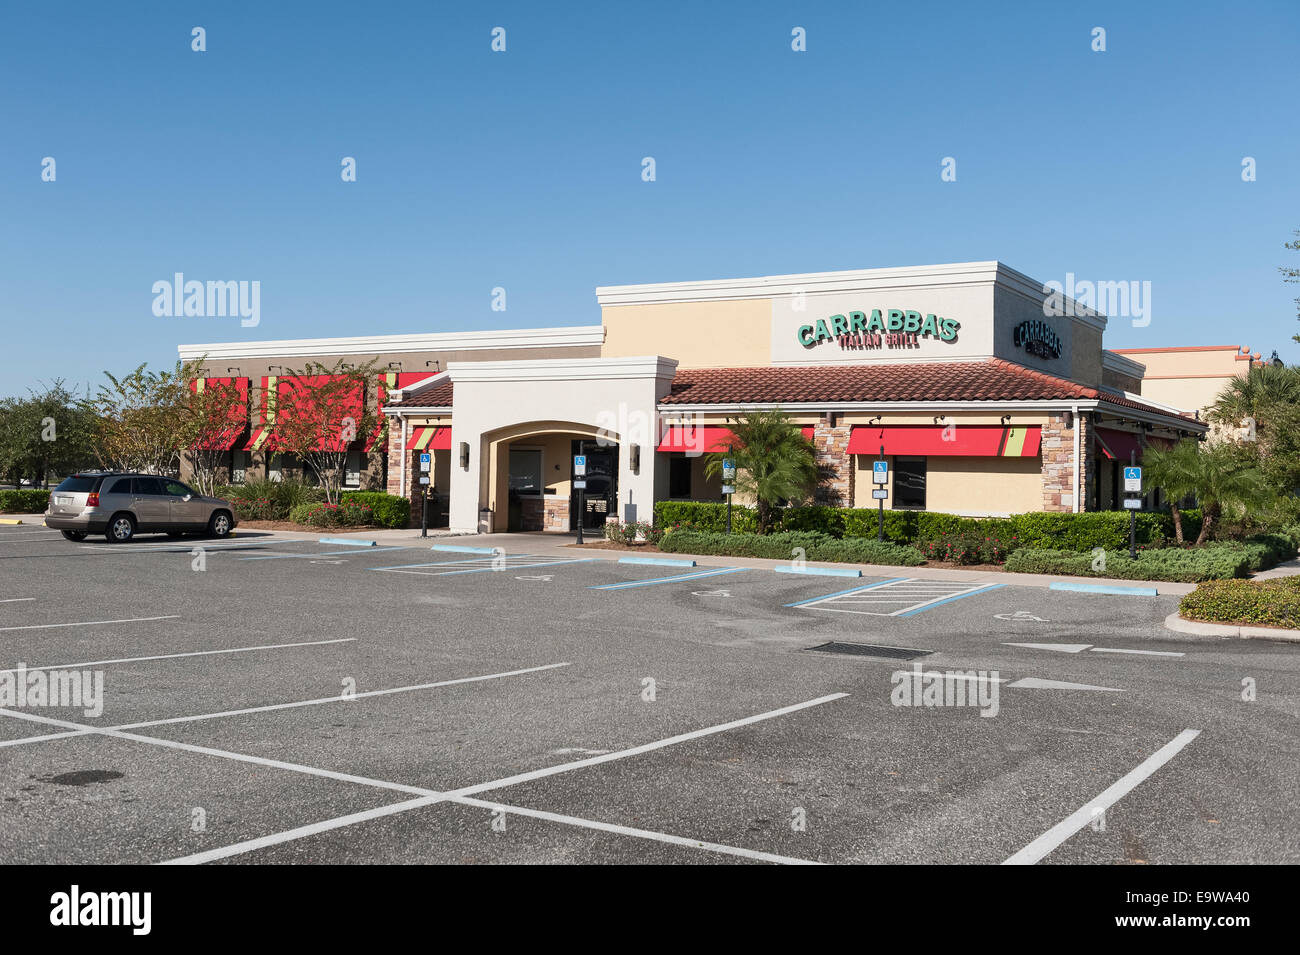 Carrabba's Italian Grill American Food Restaurant located in Lady Lake, Florida. Stock Photo